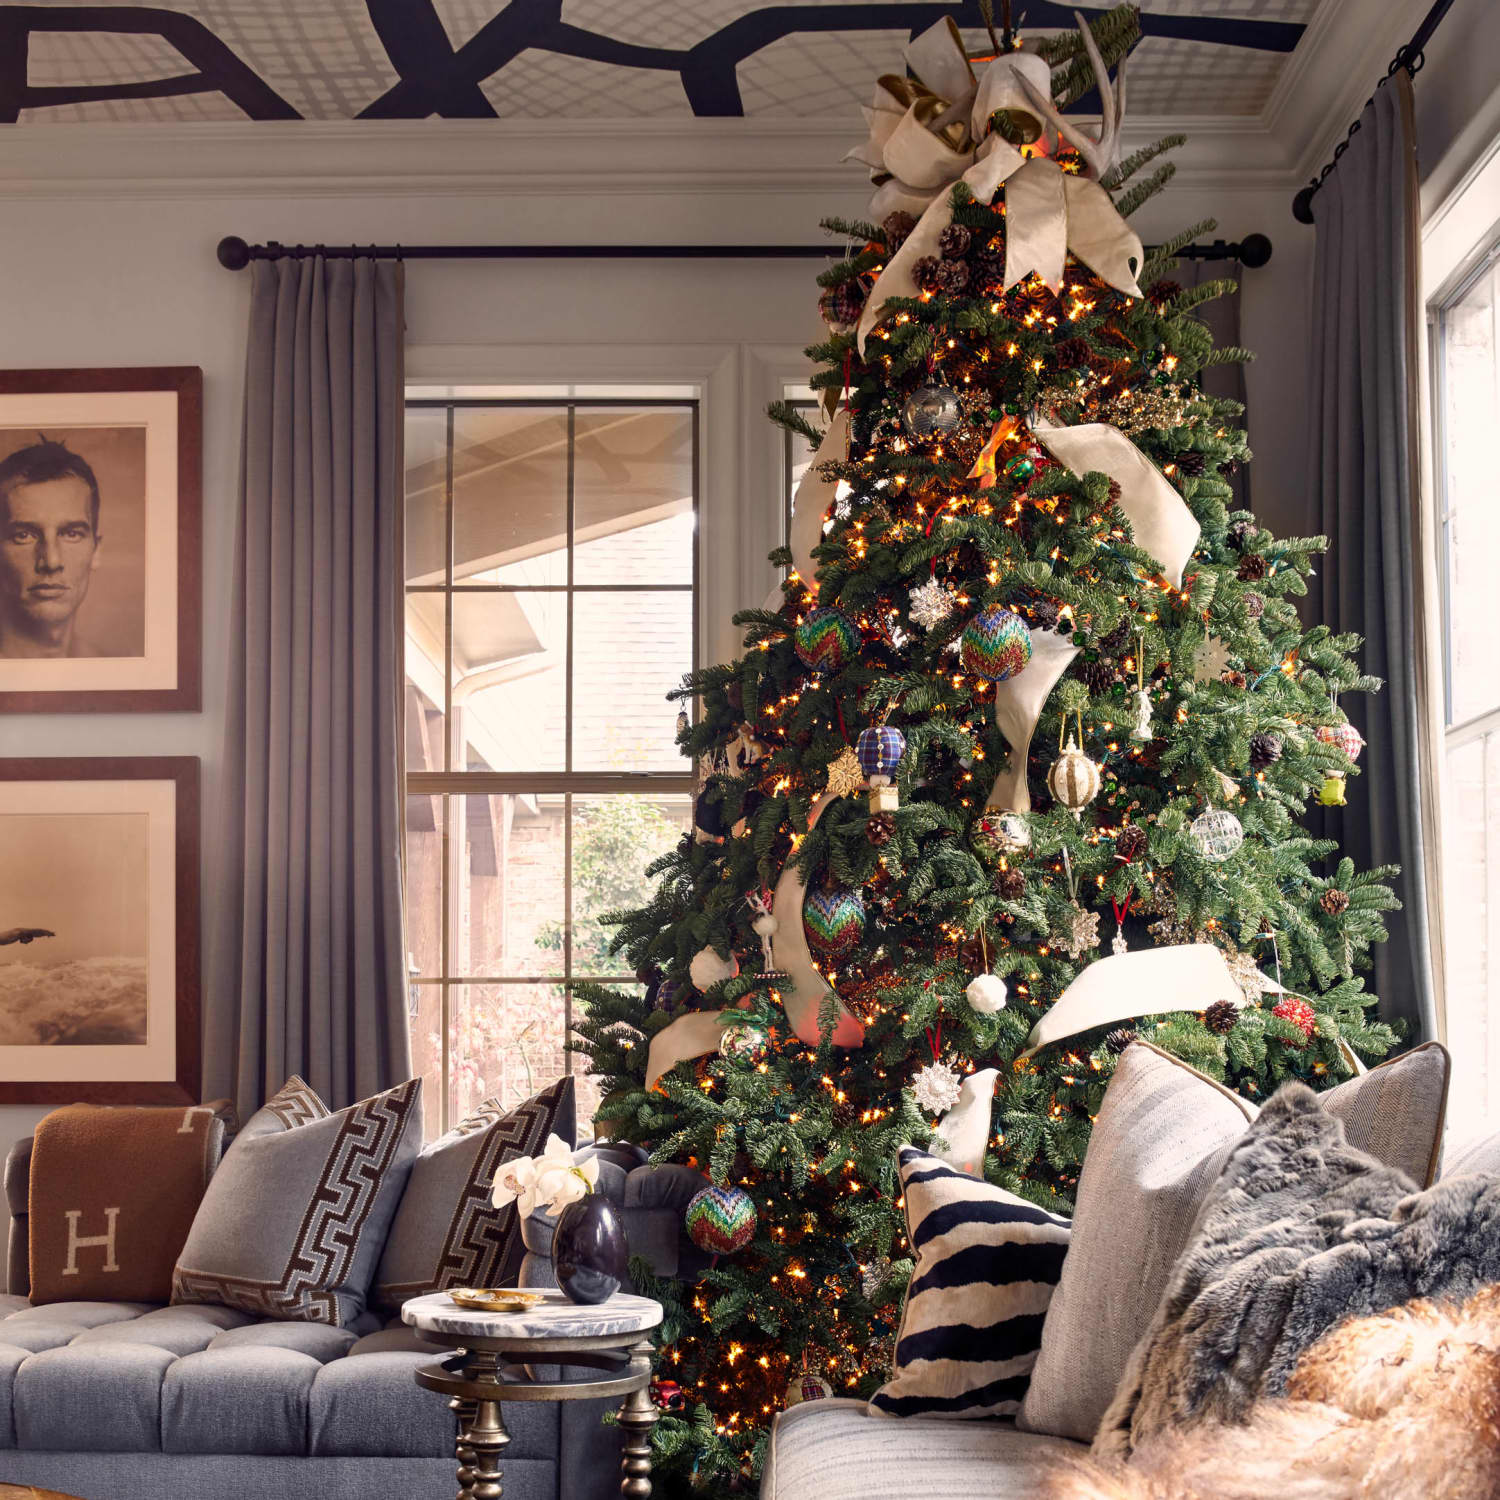 10 Christmas Color Schemes - Decorating Ideas for 2022 | Apartment ...